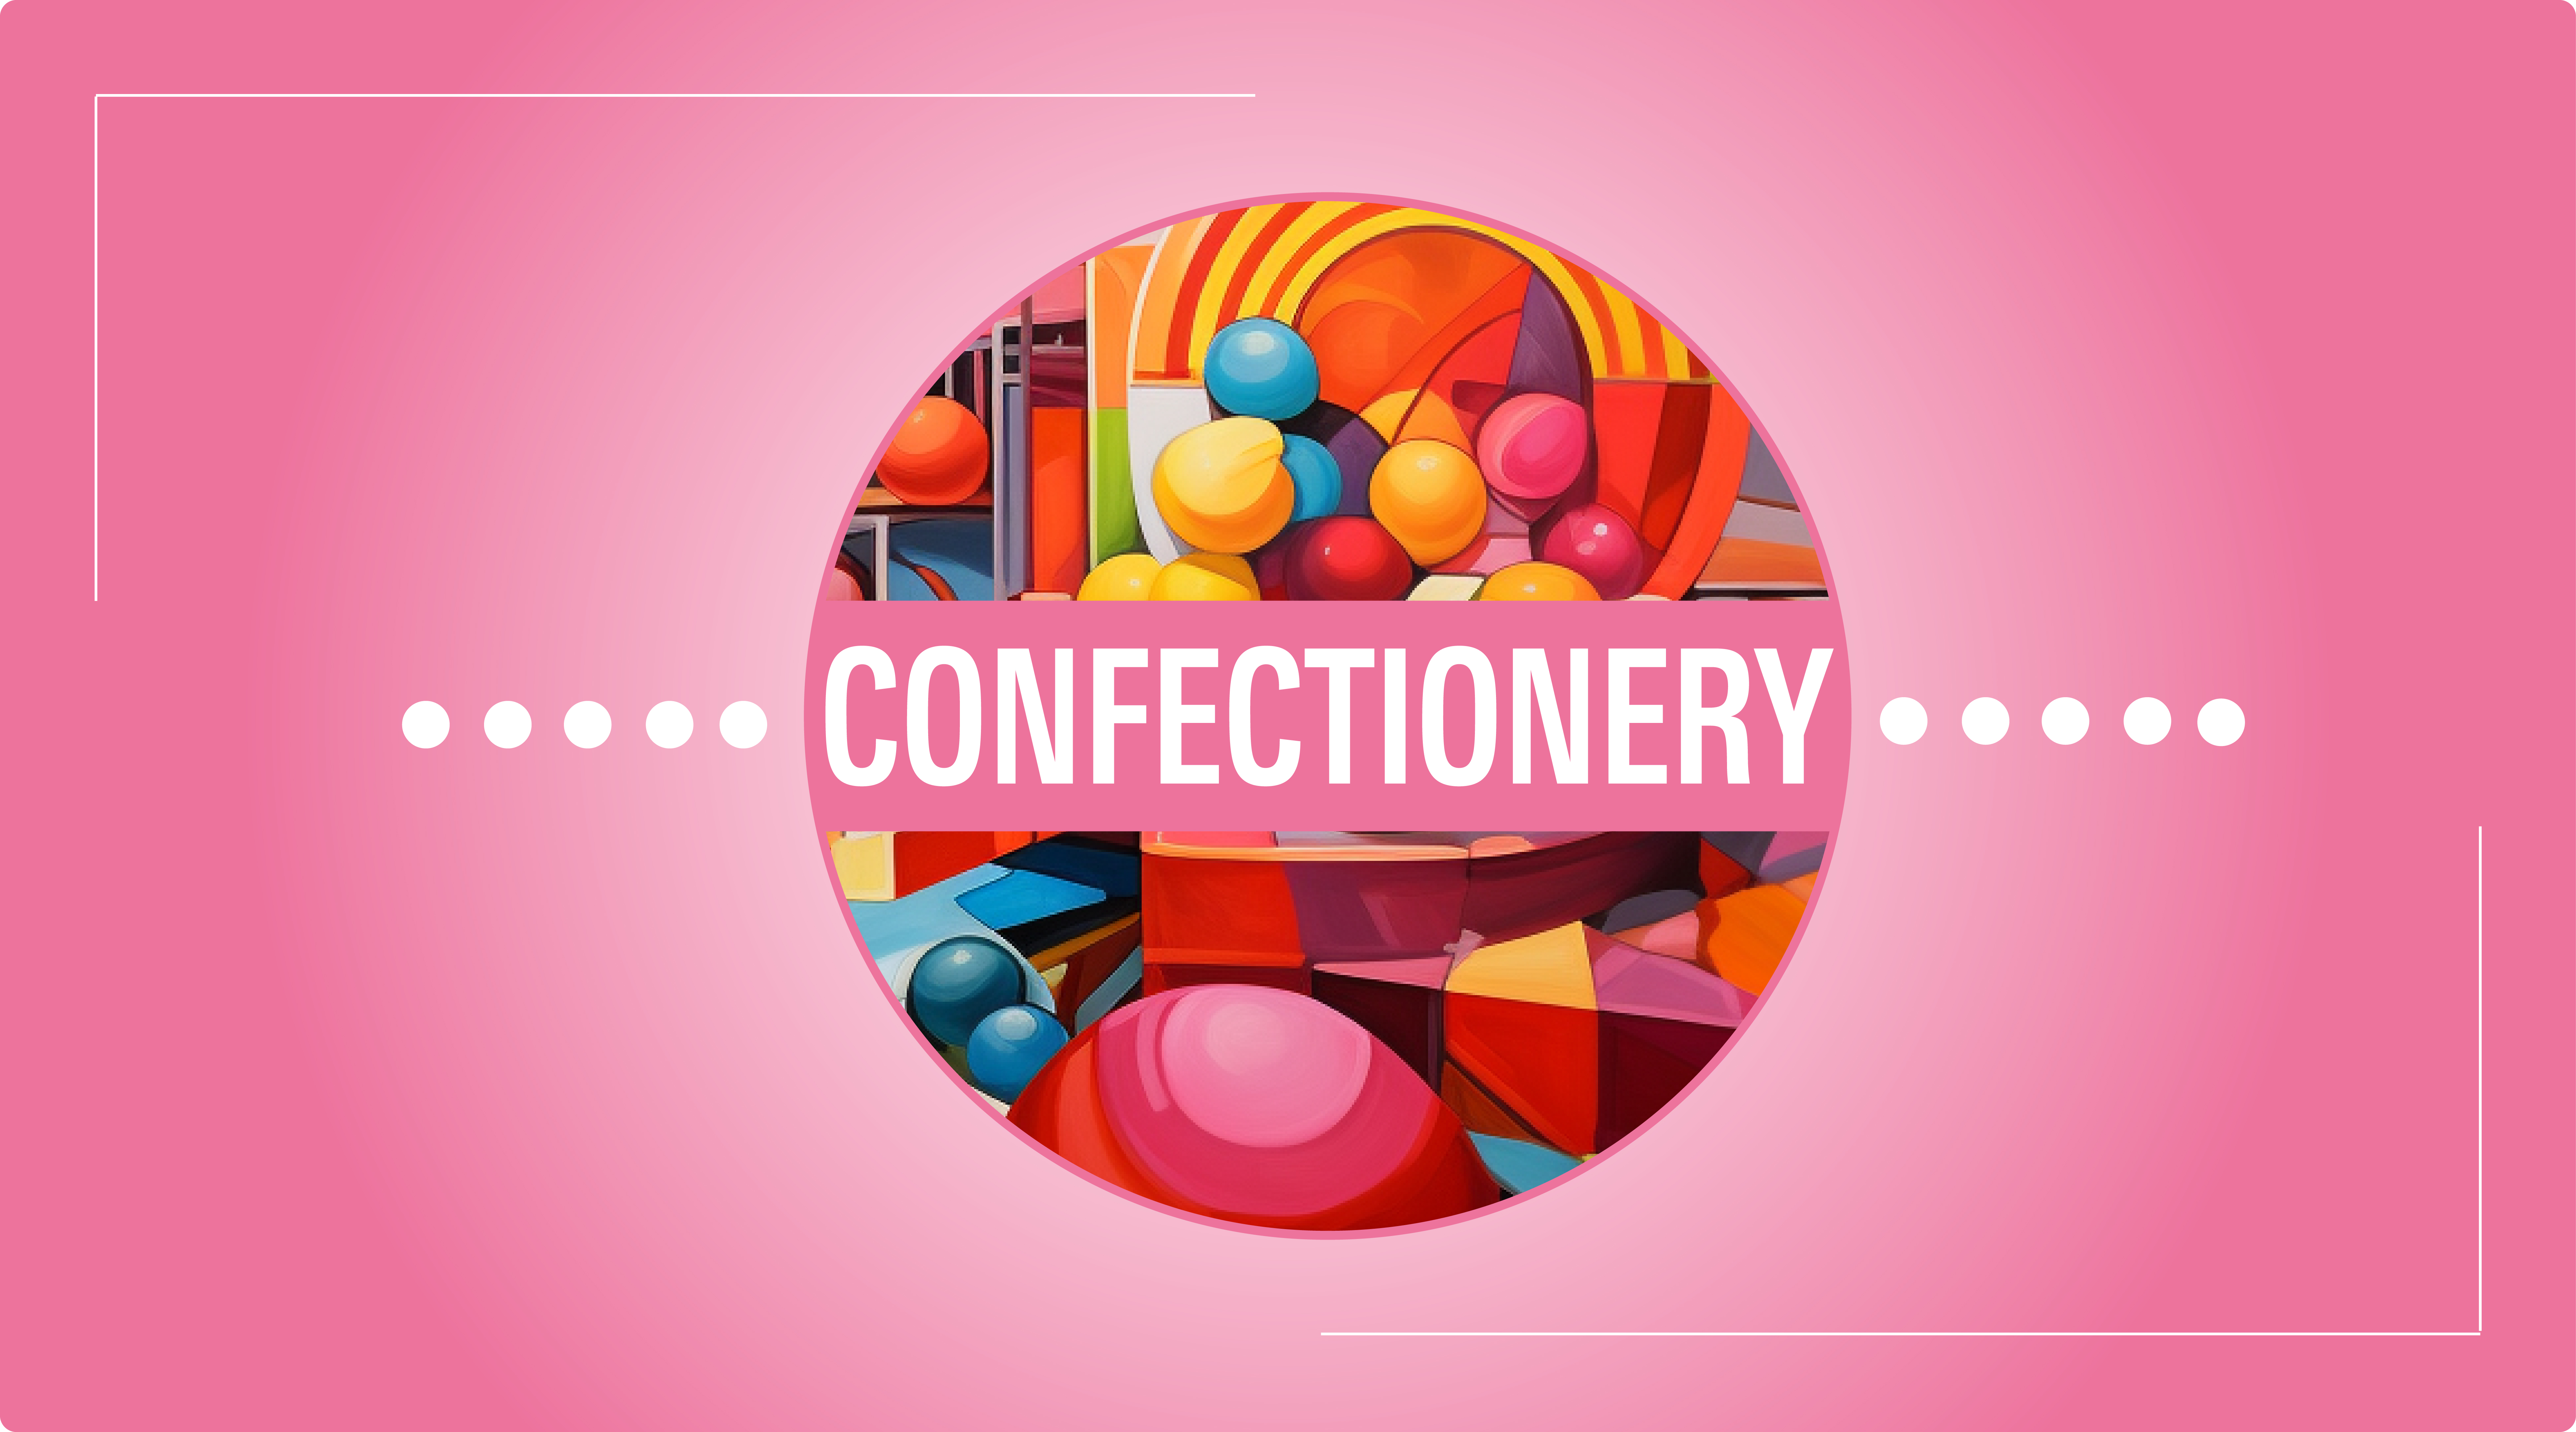 CONFECTIONERY